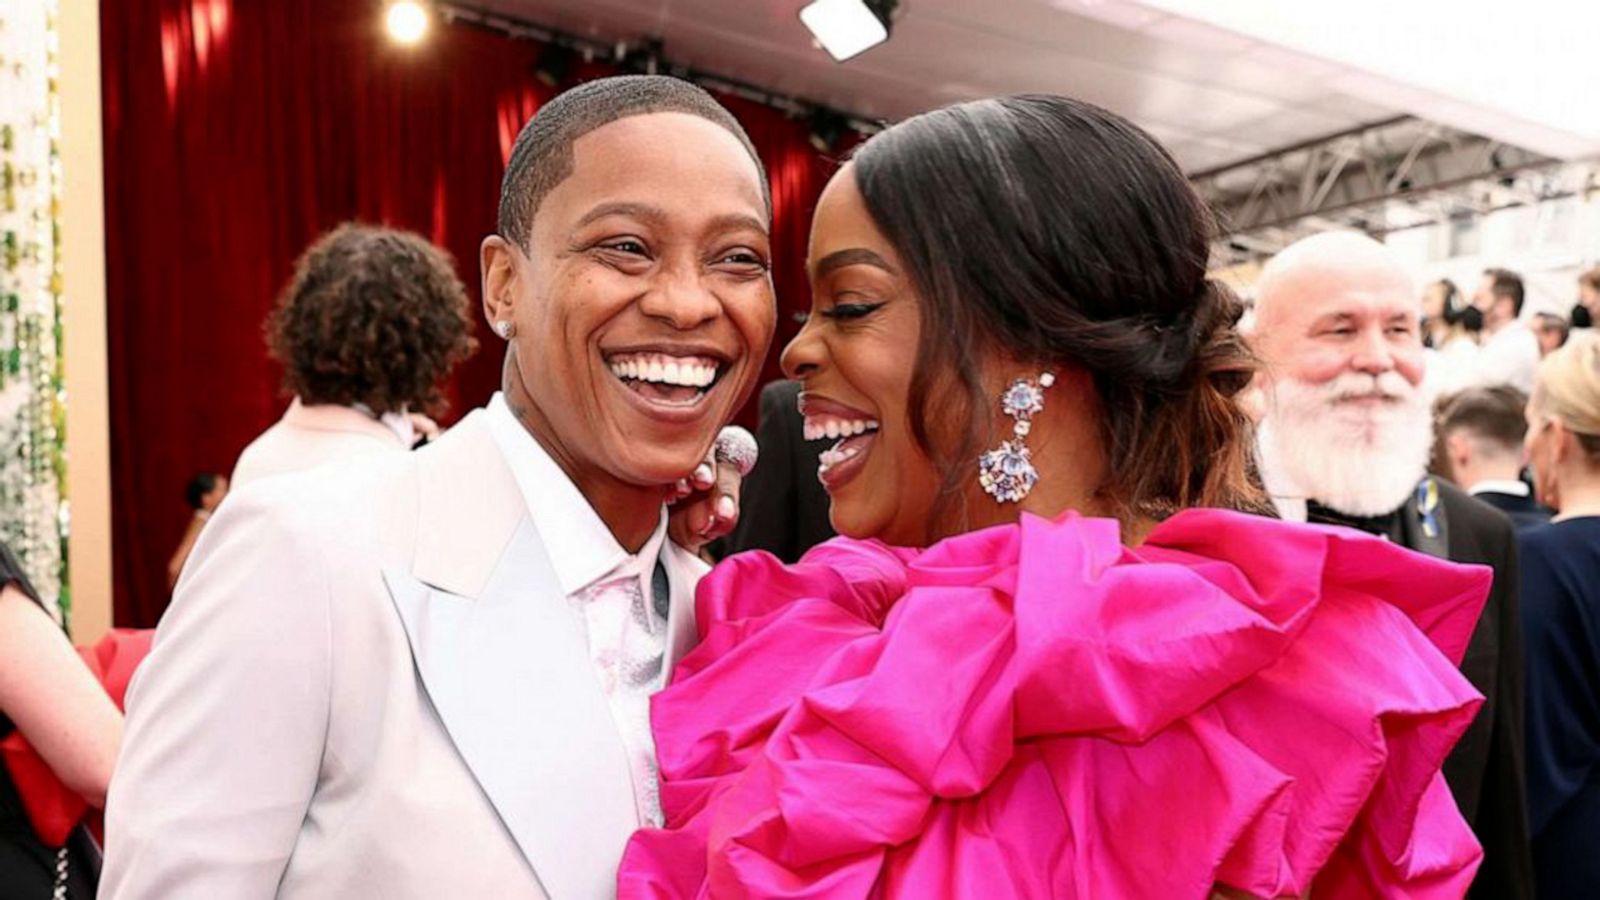 Stylish couples hit the Oscars’ red carpet Good Morning America